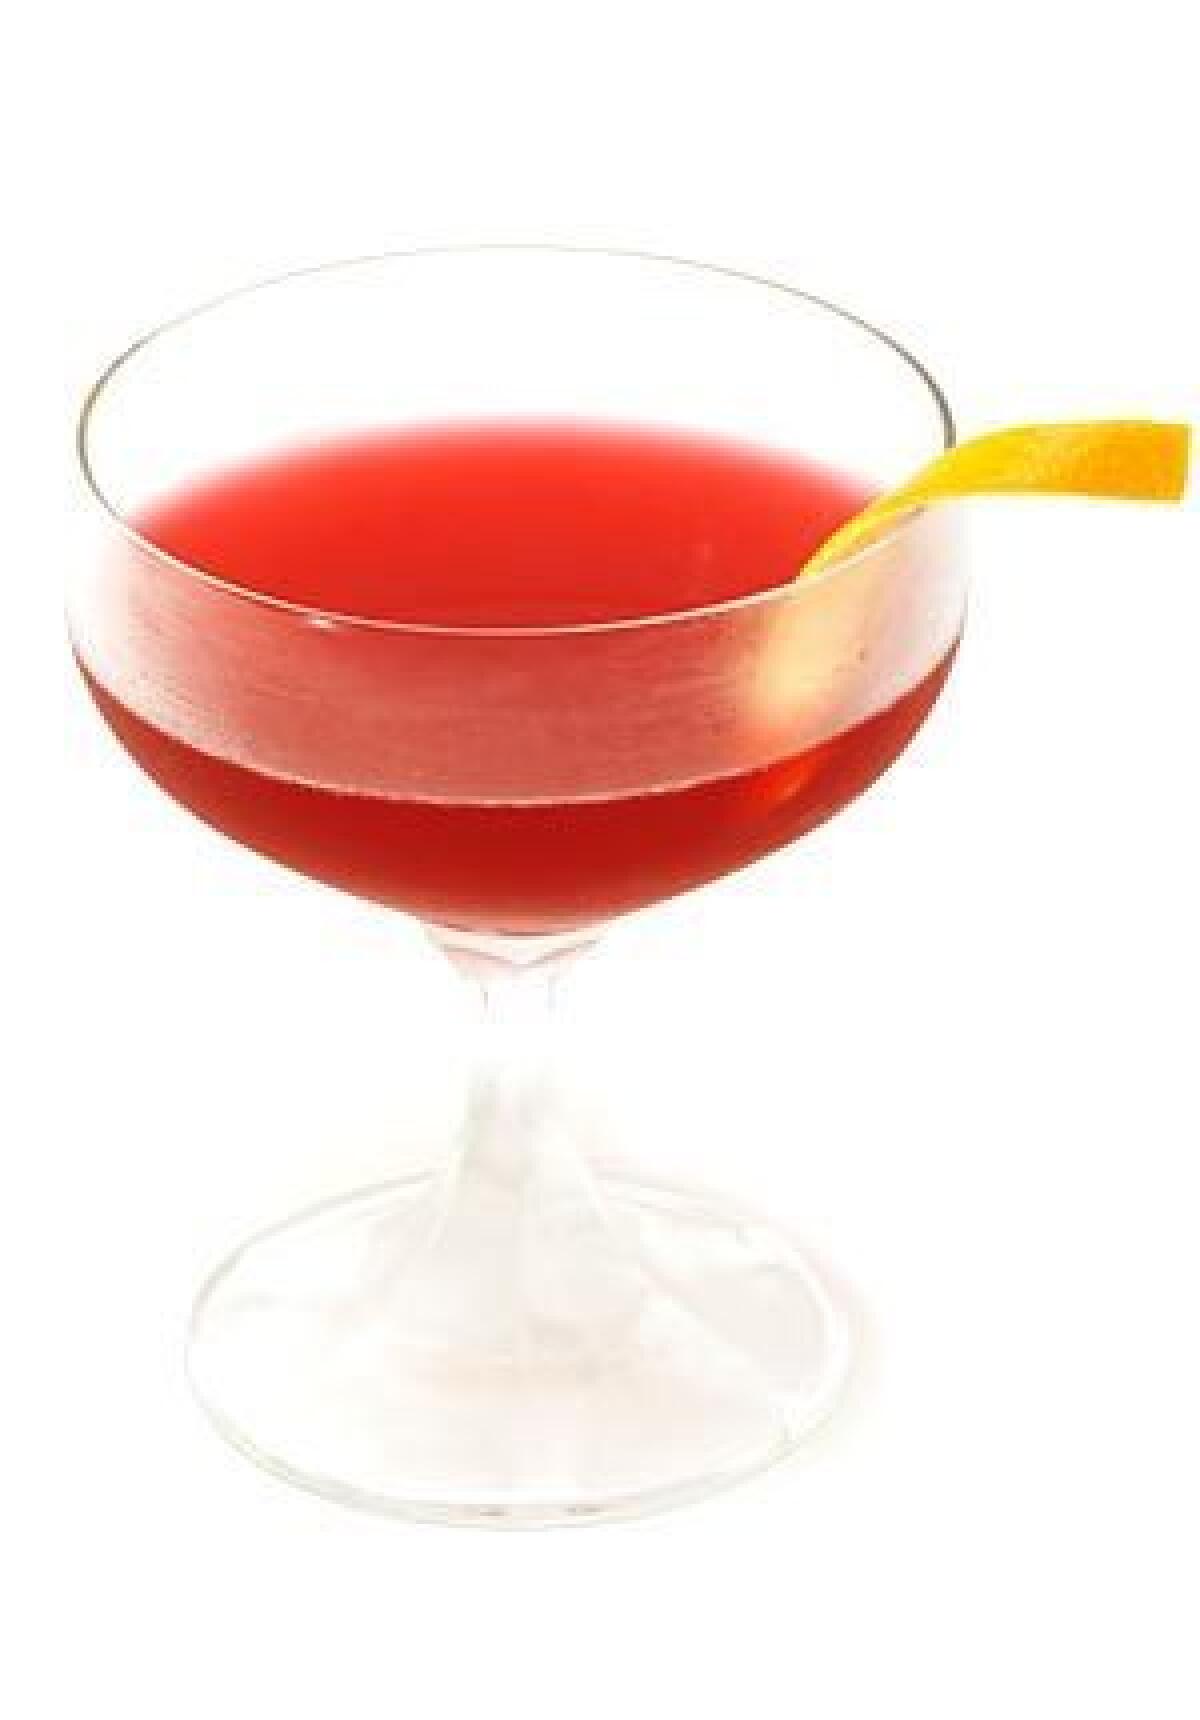 Start your Fourth of July off right with a killer cocktail. Hibiscus flower gives this cocktail it's pretty red color. Recipe